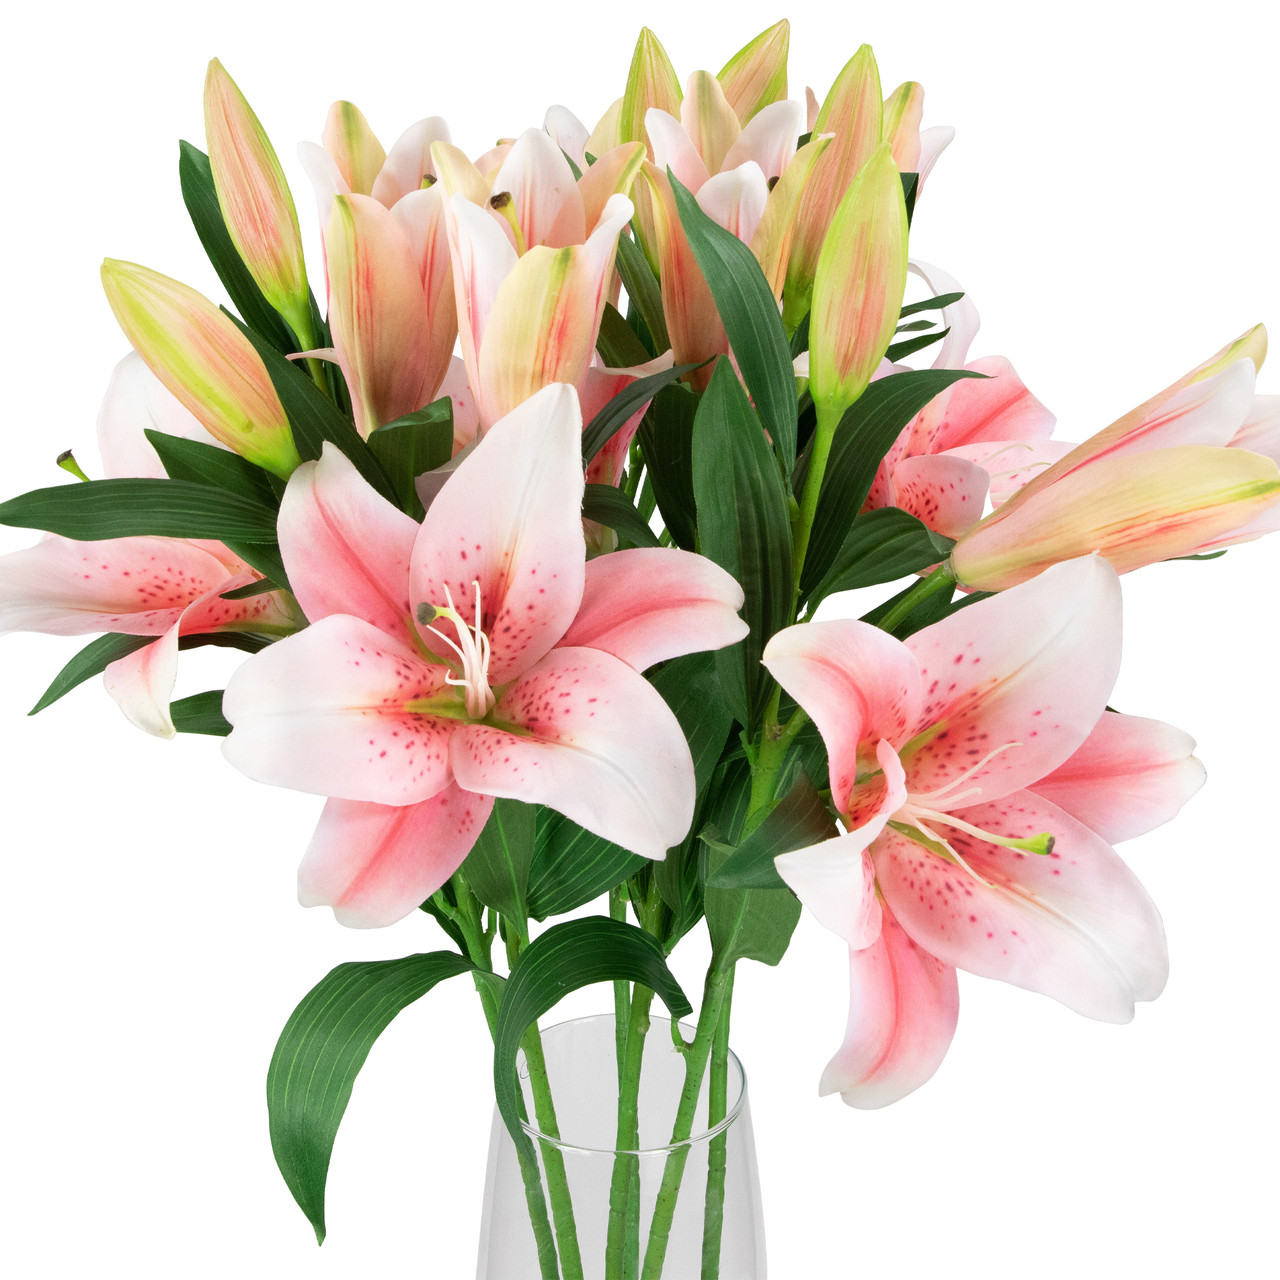 Real Touch™ White Artificial Lily Floral Stems, Set of 6 -38